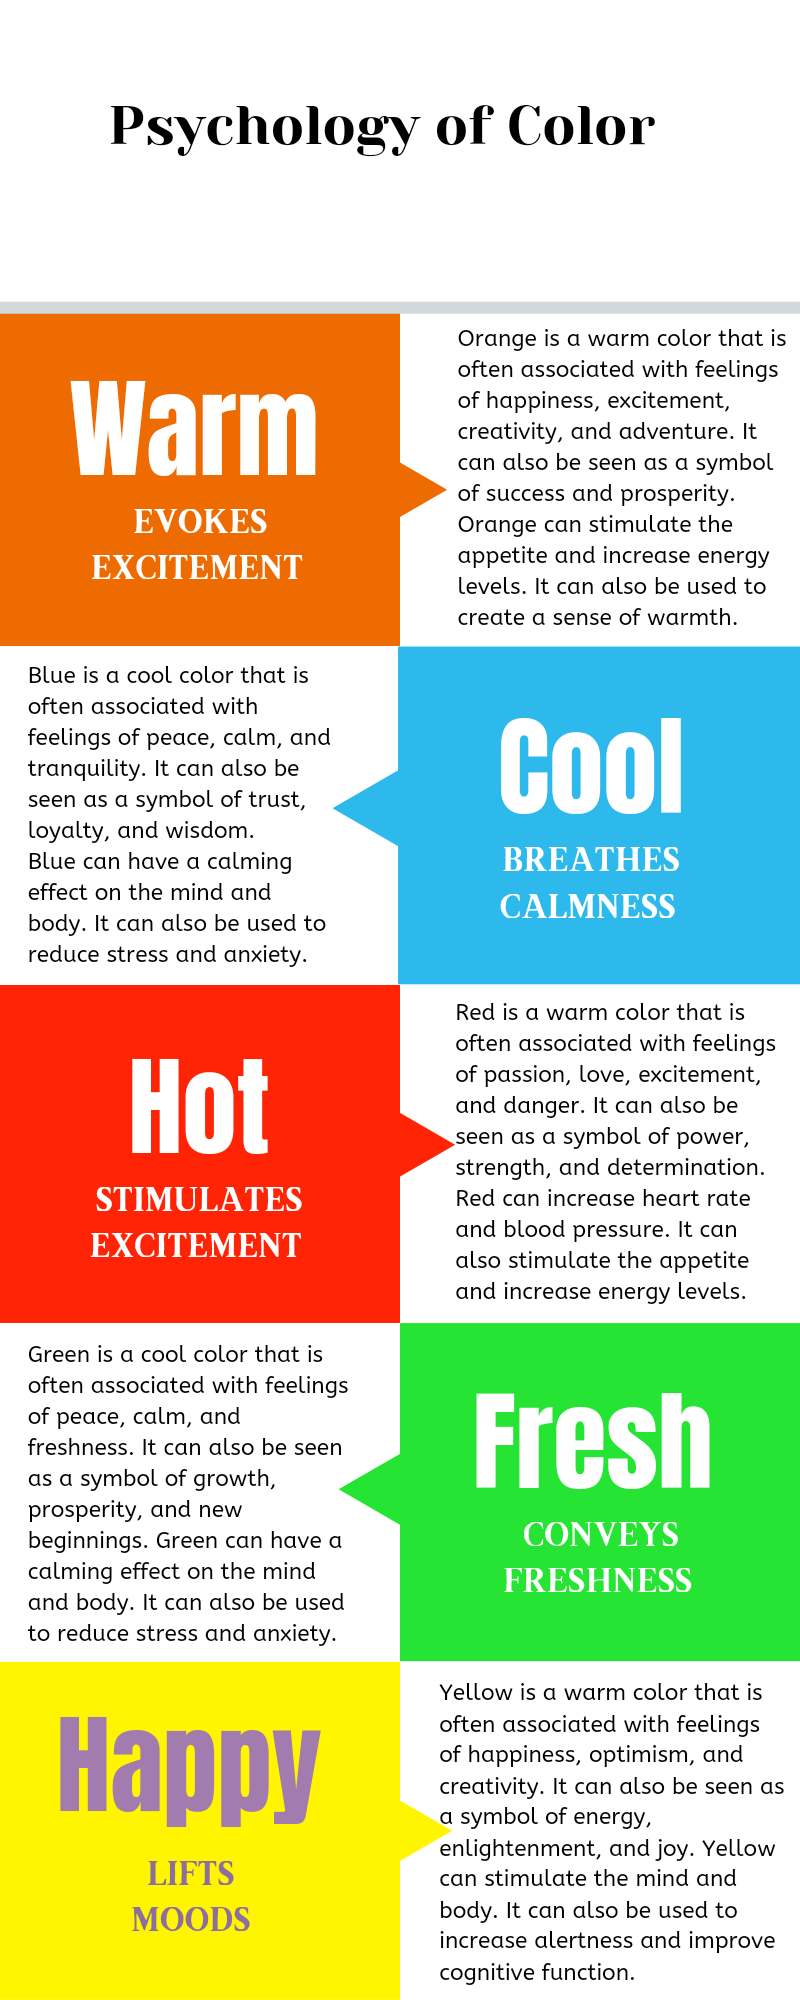 An infographic depicting the emotional responses evoked by different colors